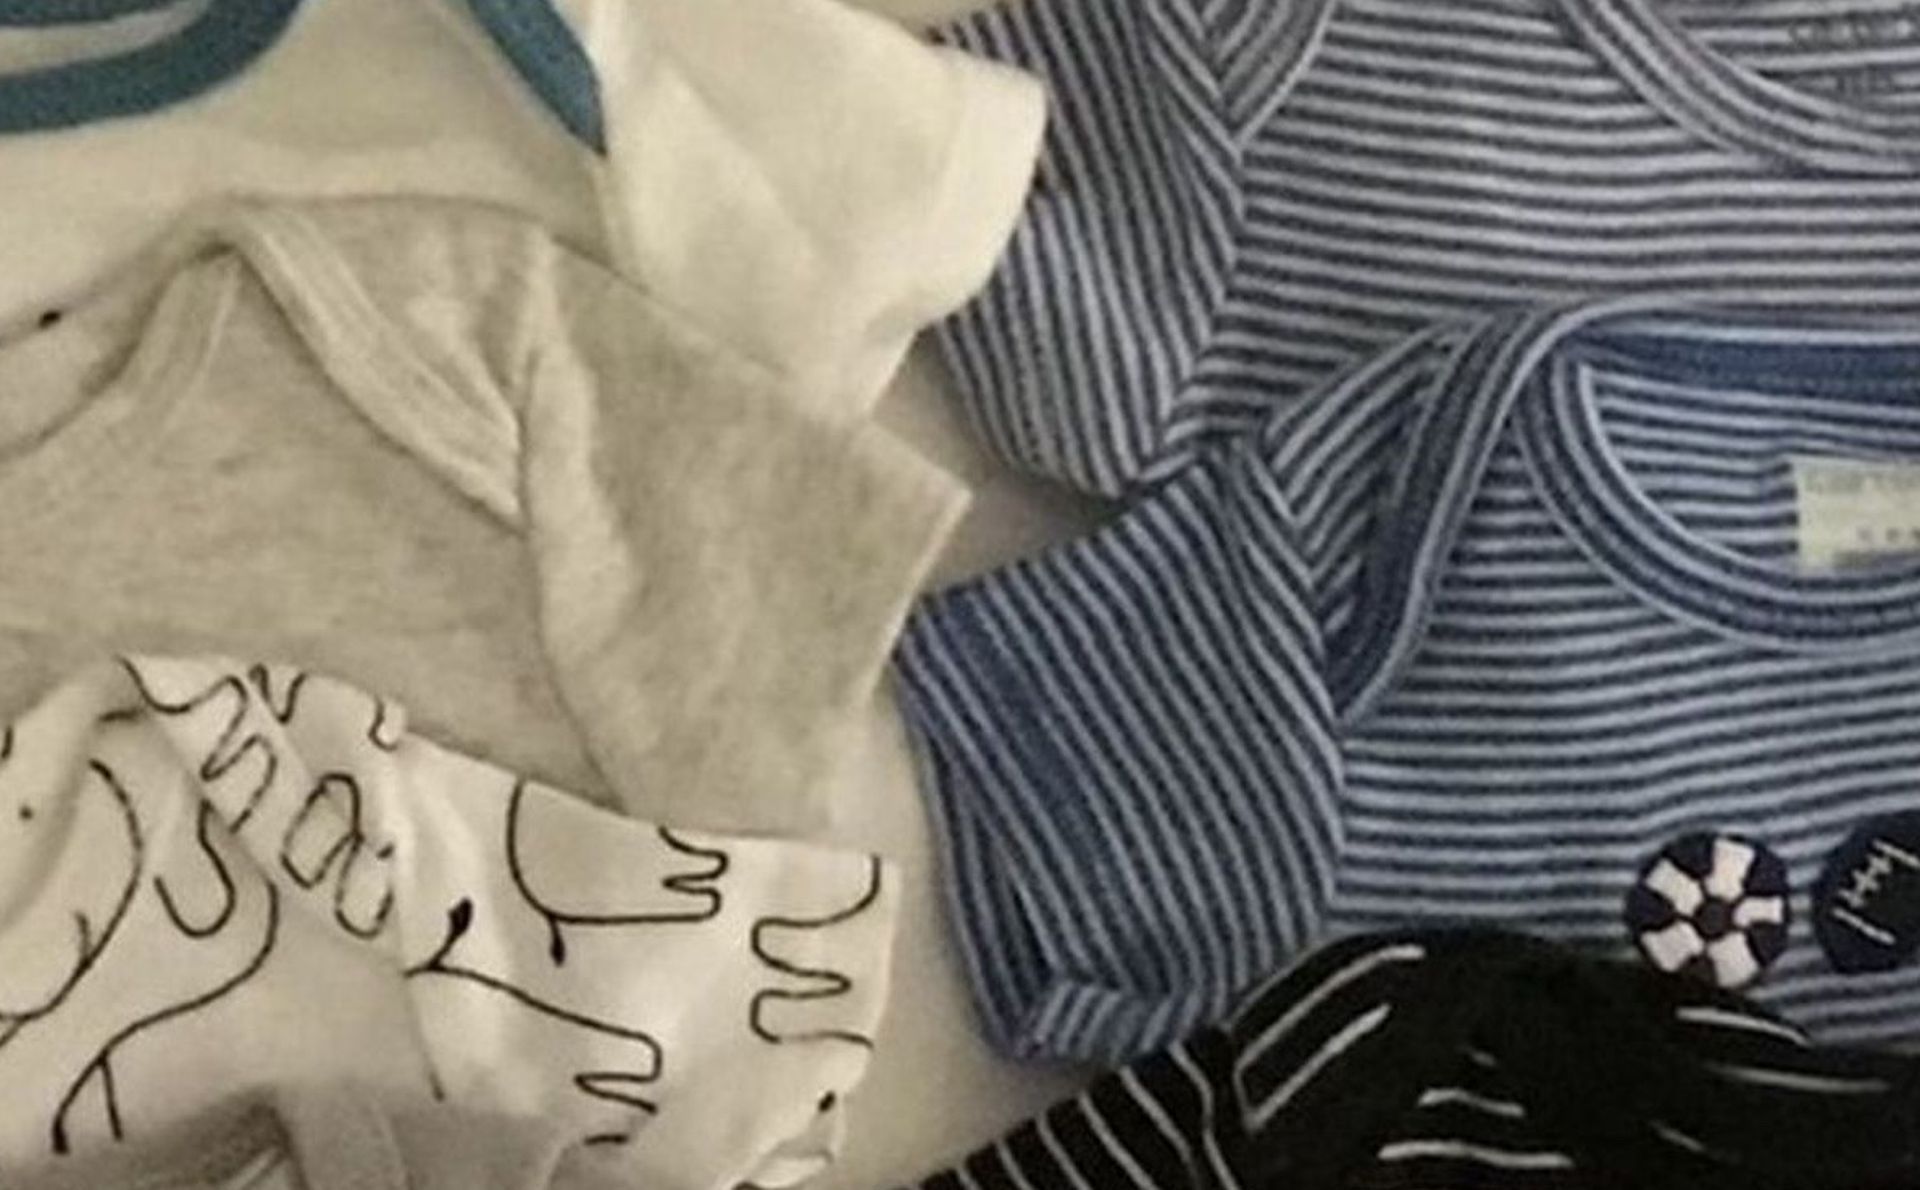 Newborn Baby Boy Clothes! B Good Condition. Can Gently Used. No Smoking. $1 Each Or $40For Everything